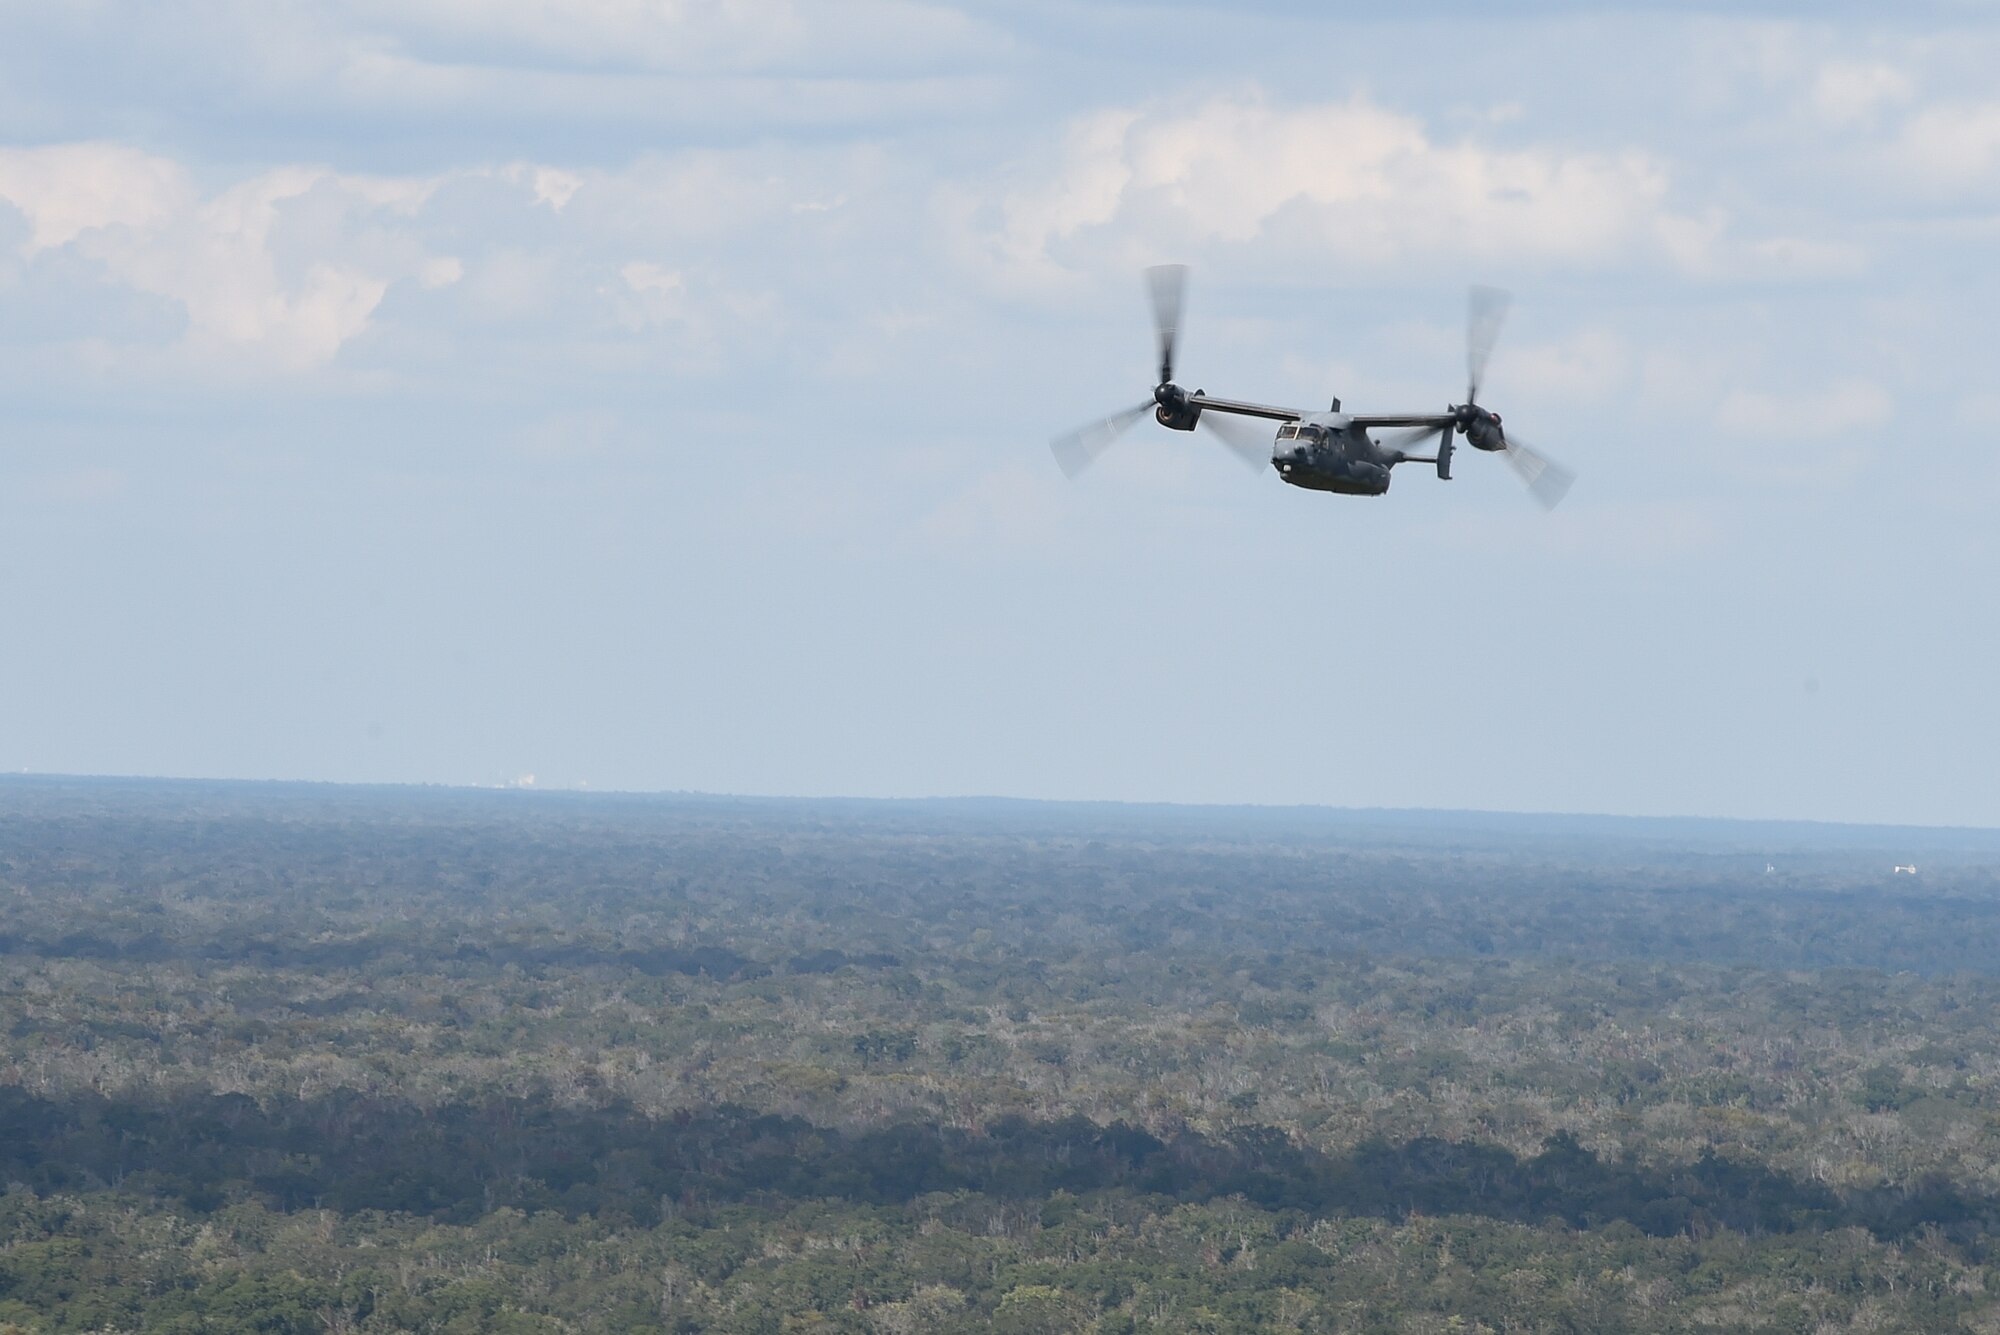 A CV-22 Osprey flies over Camp Shelby, Miss., during Task Force Exercise Southern Strike, Oct. 26, 2016. The CV-22 crews with the 8th Special Operations Squadron provided infiltration/exfiltration and fast-roping training for Naval Special Warfare personnel. (U.S. Air Force photo by Senior Airman Jeff Parkinson)